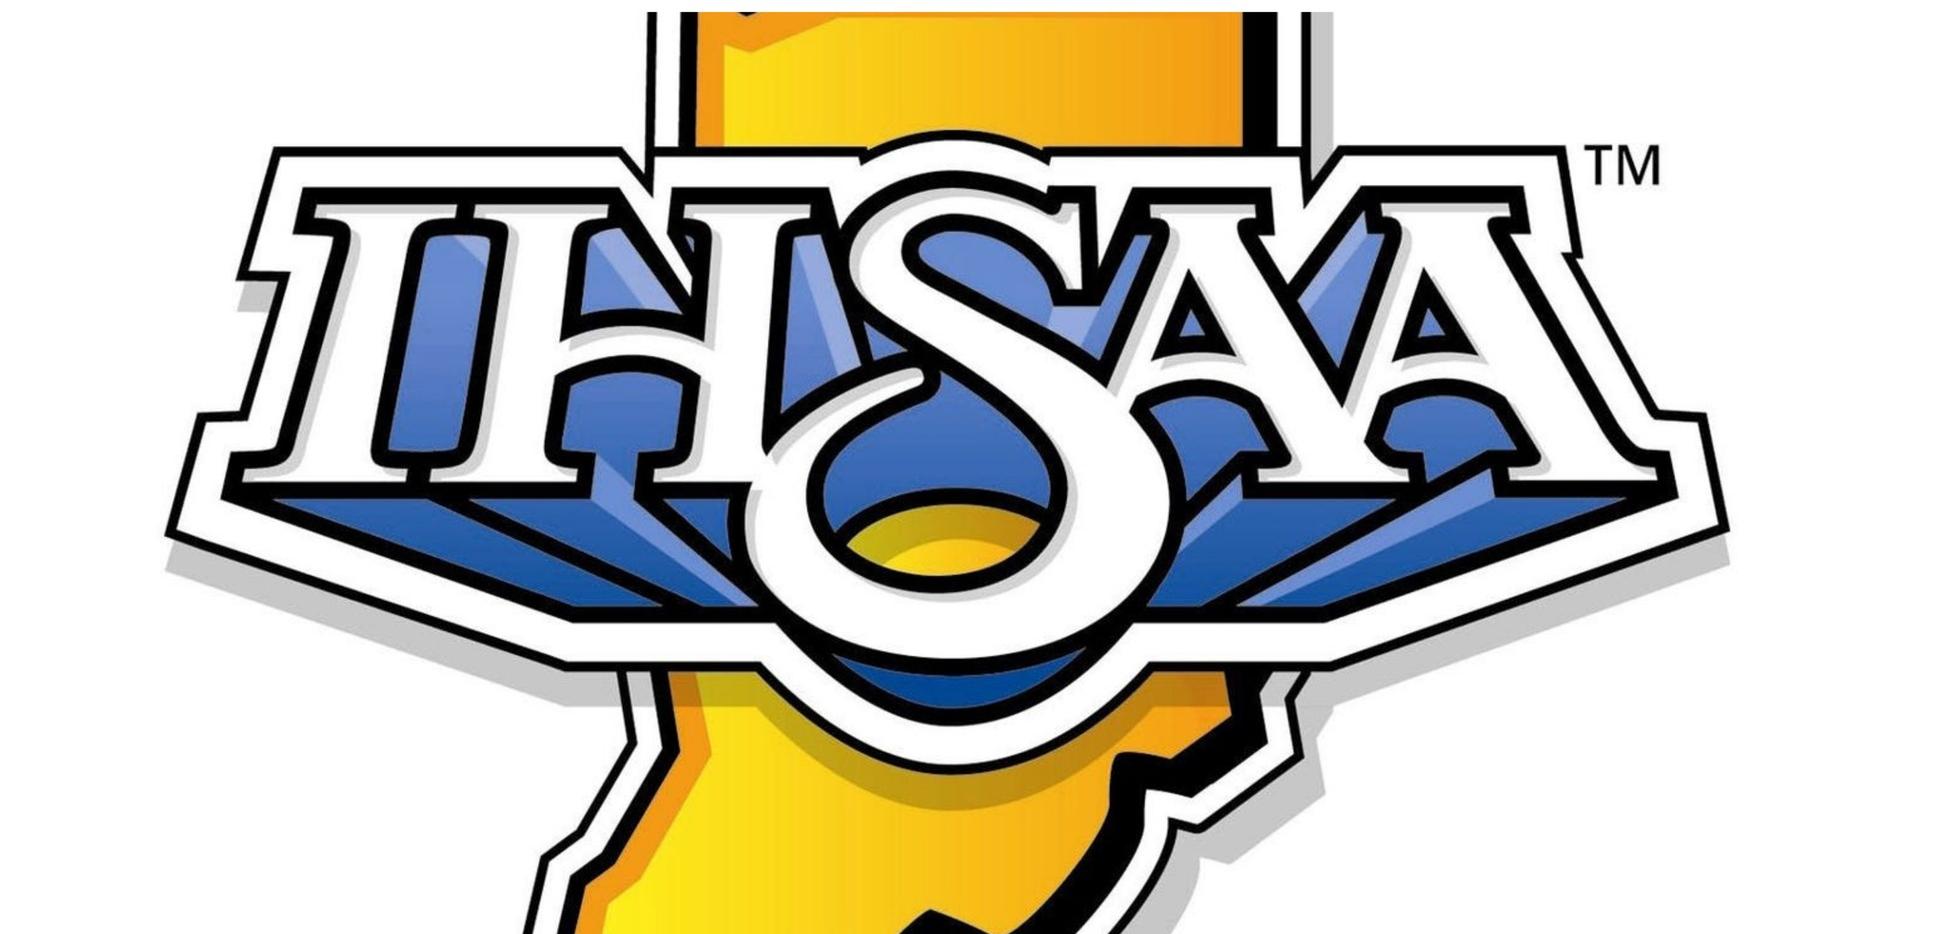 48th Annual IHSAA Football State Tournament Pairings show set for Thursday